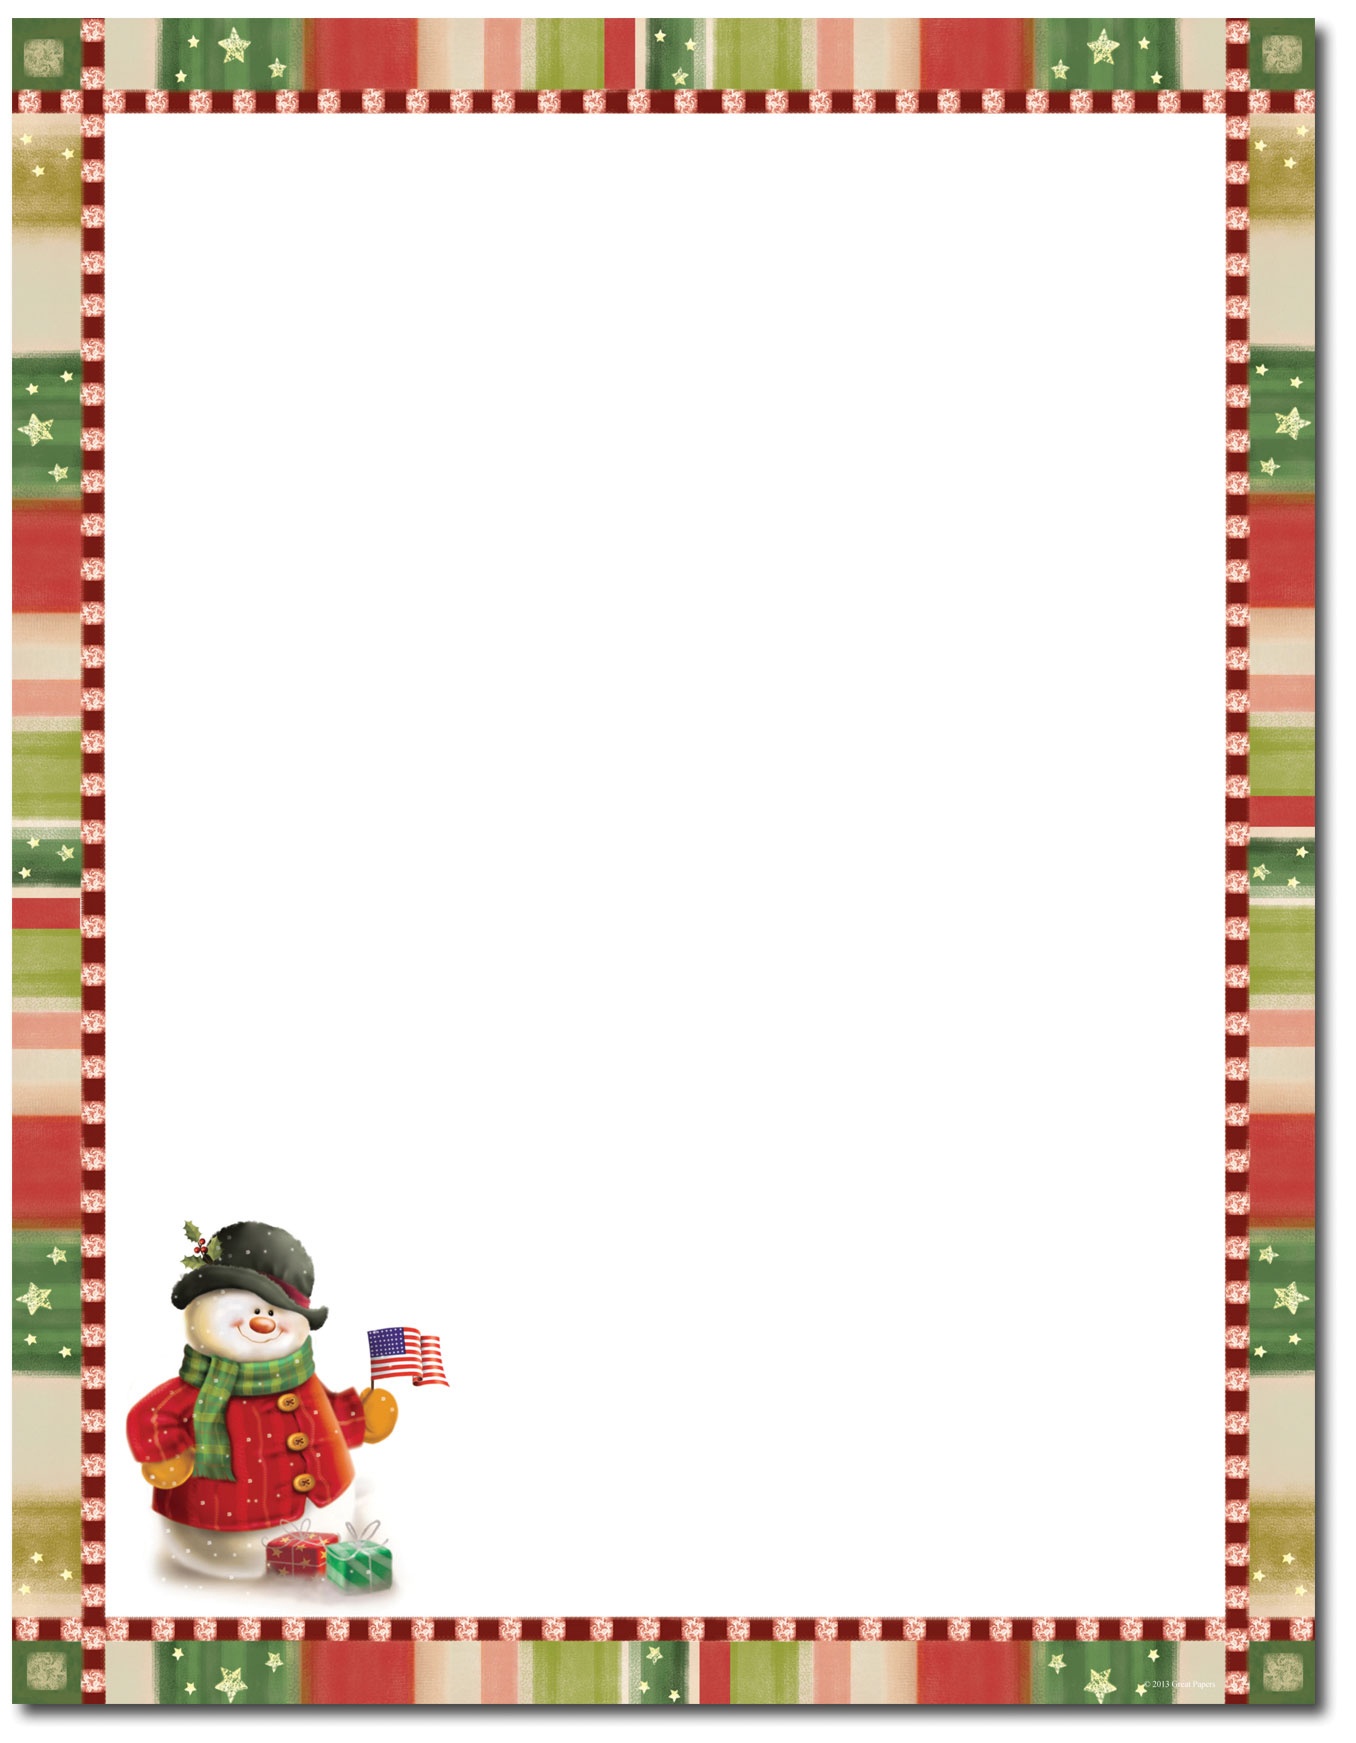 Free Christmas Stationary Cliparts, Download Free Clip Art, Free - Free Printable Christmas Stationary